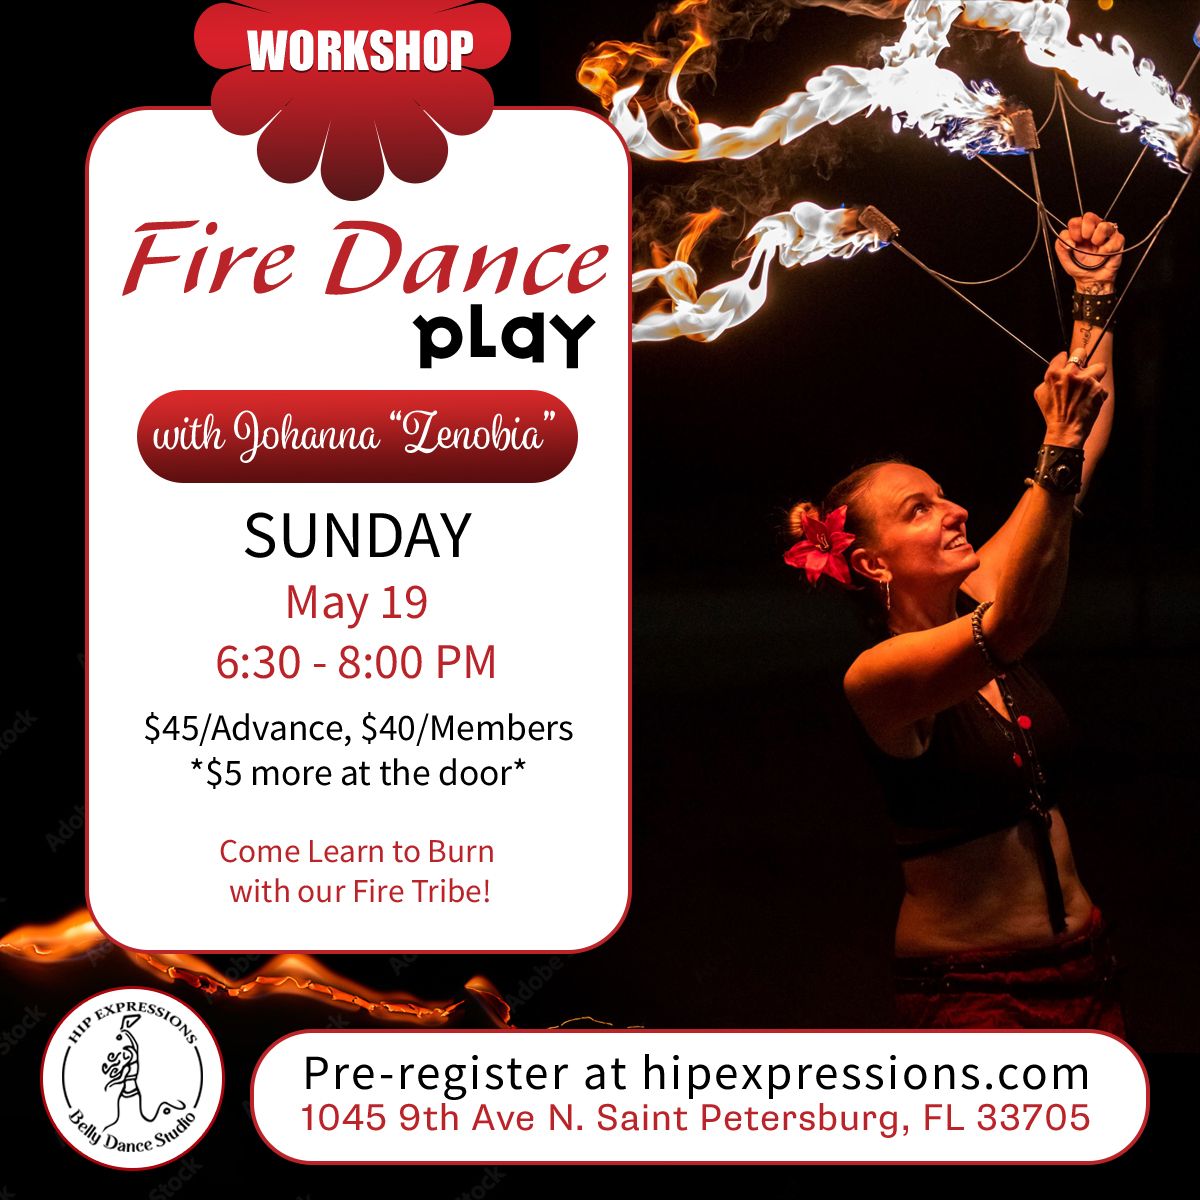 Fire Dance Play with Johanna Zenobia | May 19 | 6:30 pm | At Hip Expressions